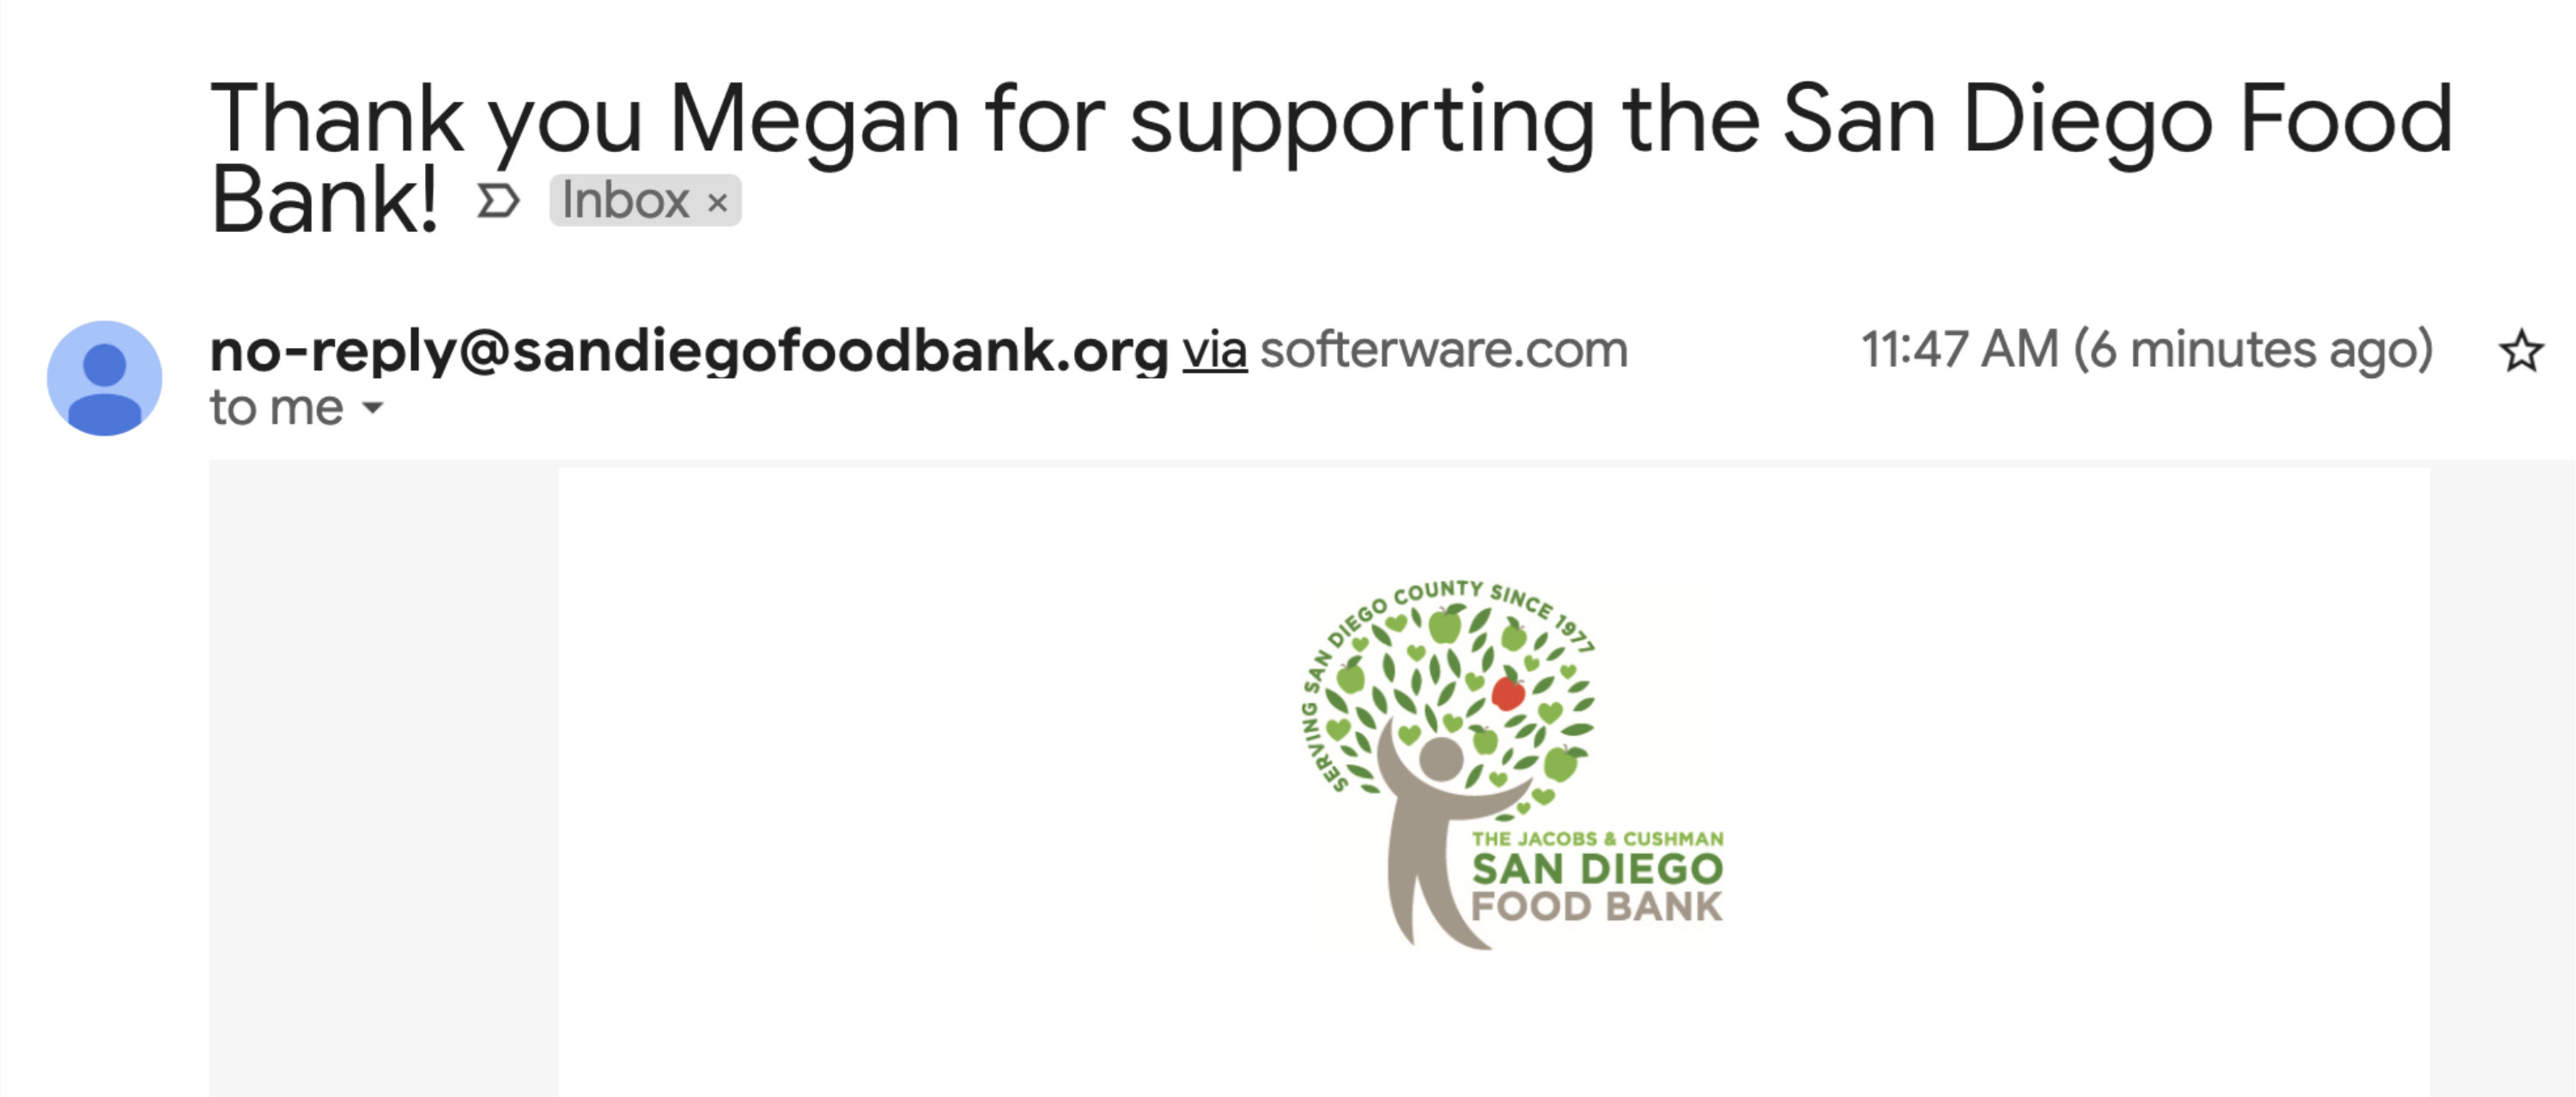 thank you Megan for supporting the san diego food bank